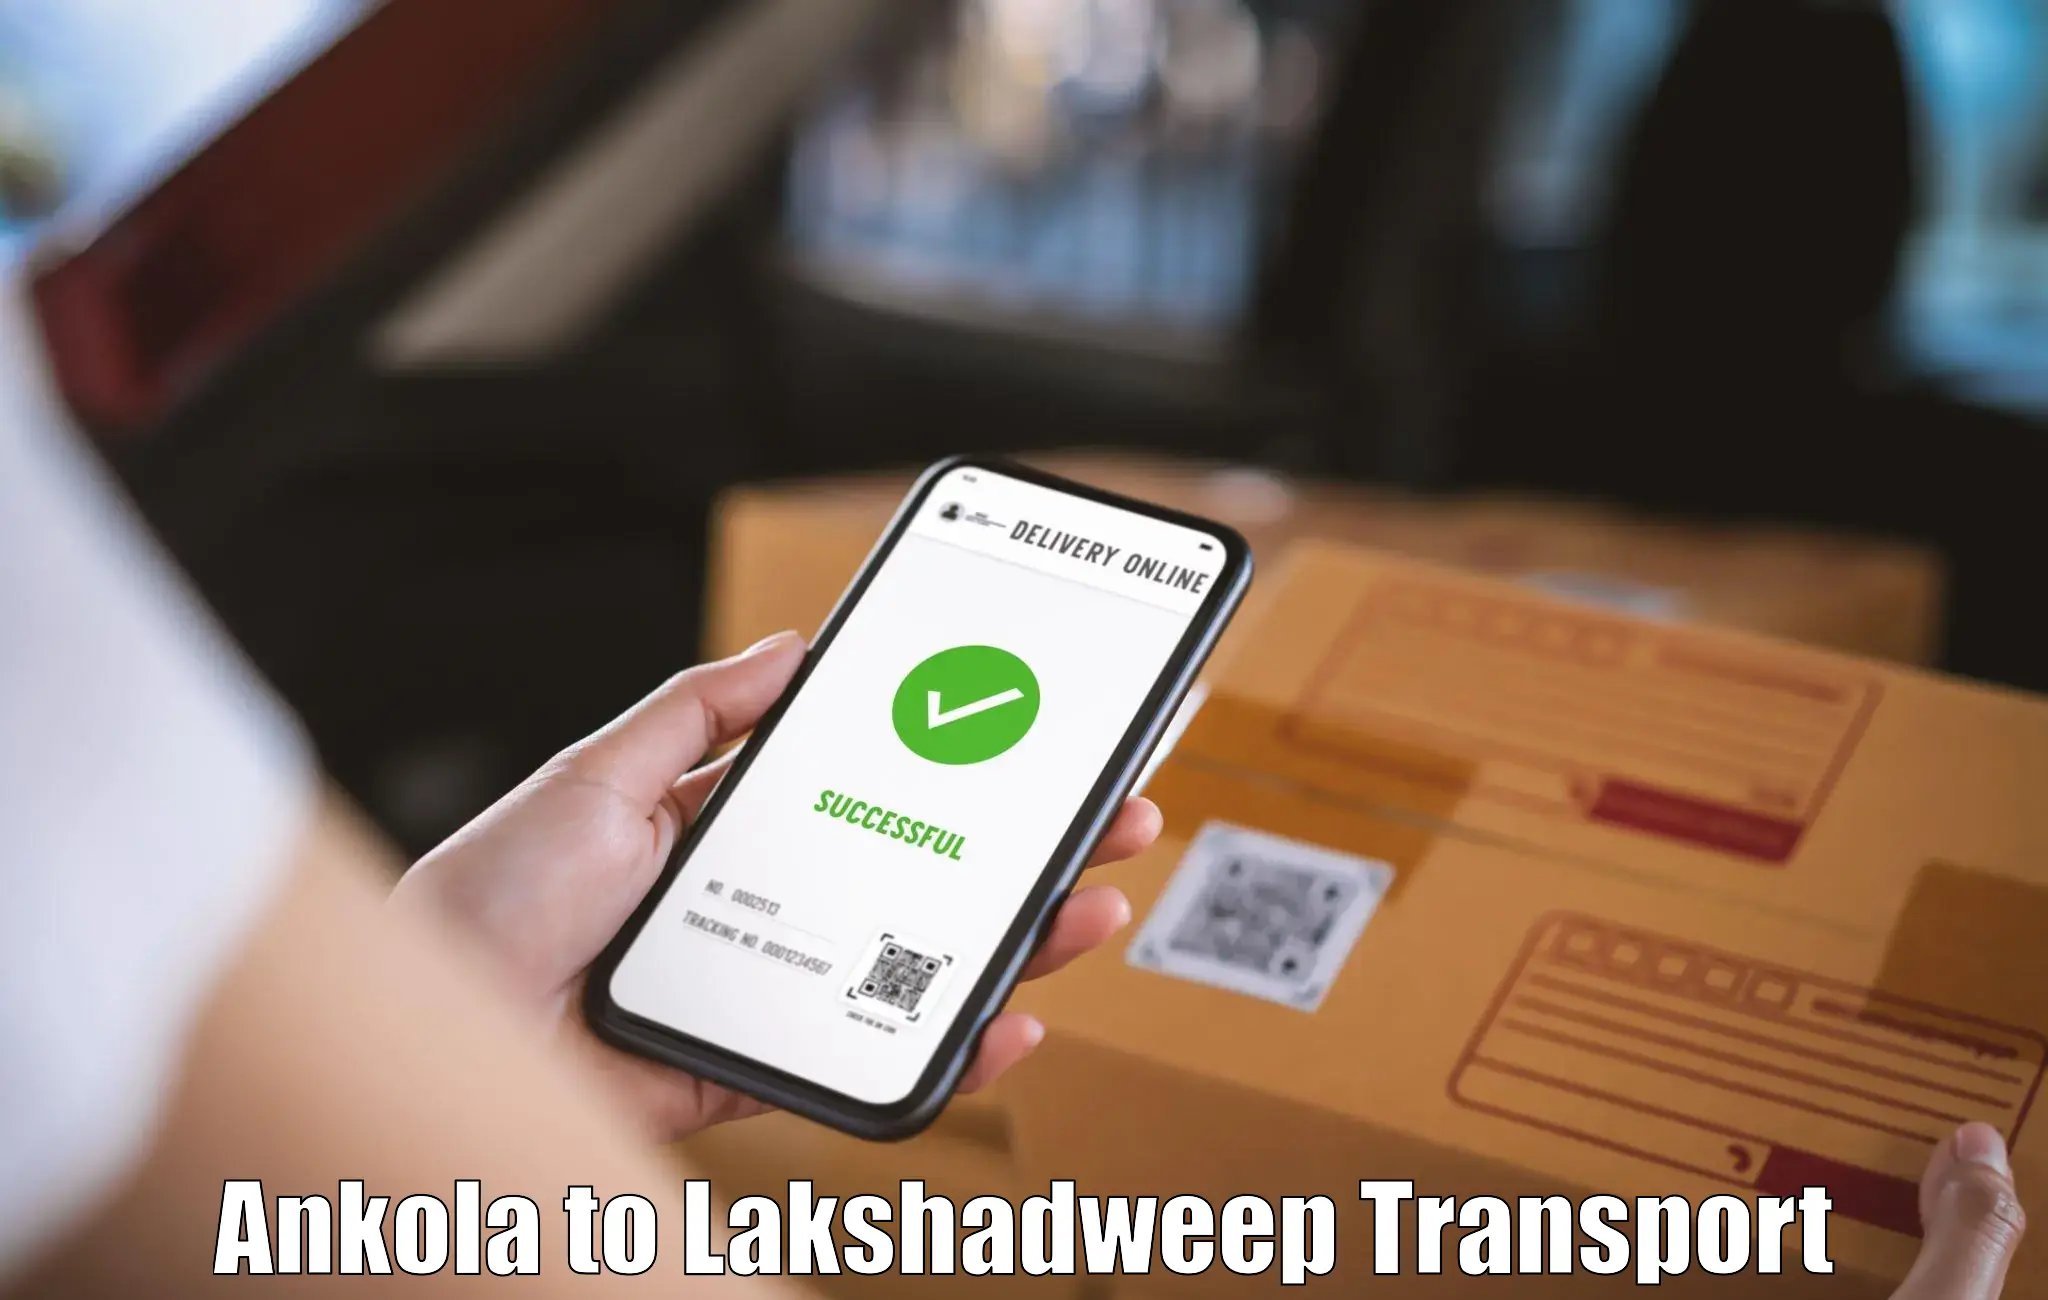 Transport bike from one state to another Ankola to Lakshadweep